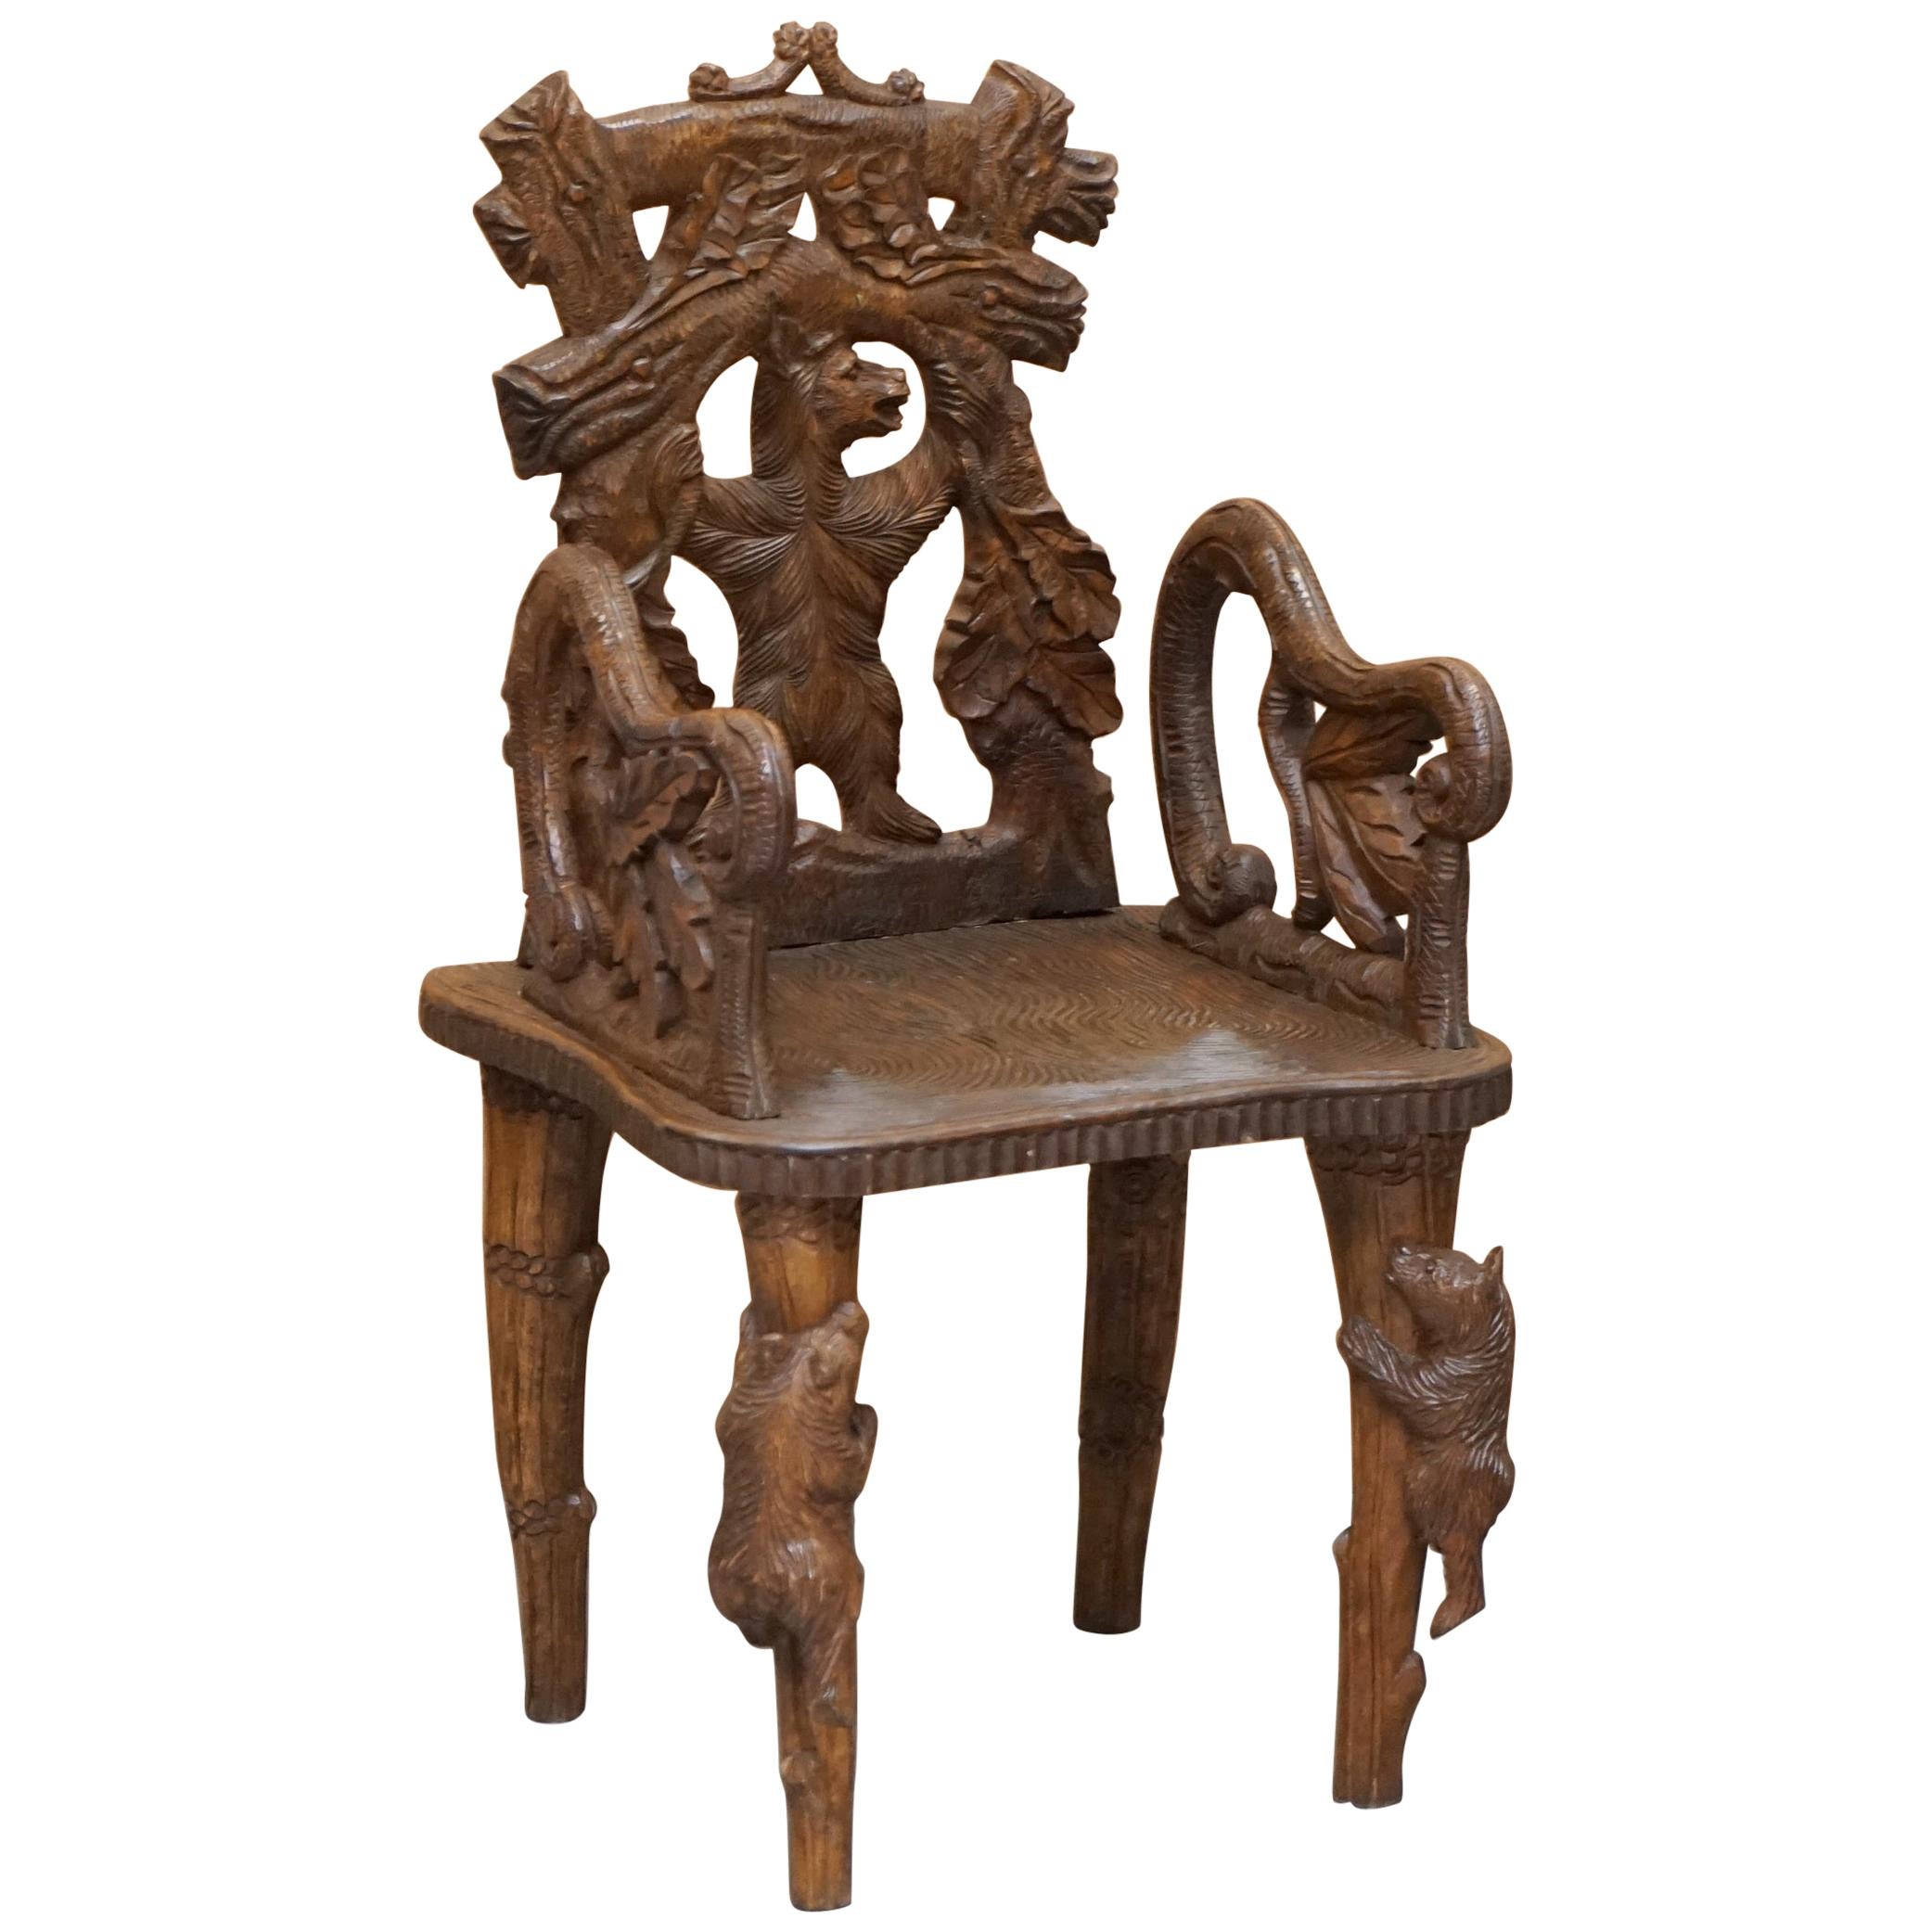 Vintage Hand Carved Black Forest Wood Bear Armchair with Bears Climbing the Legs